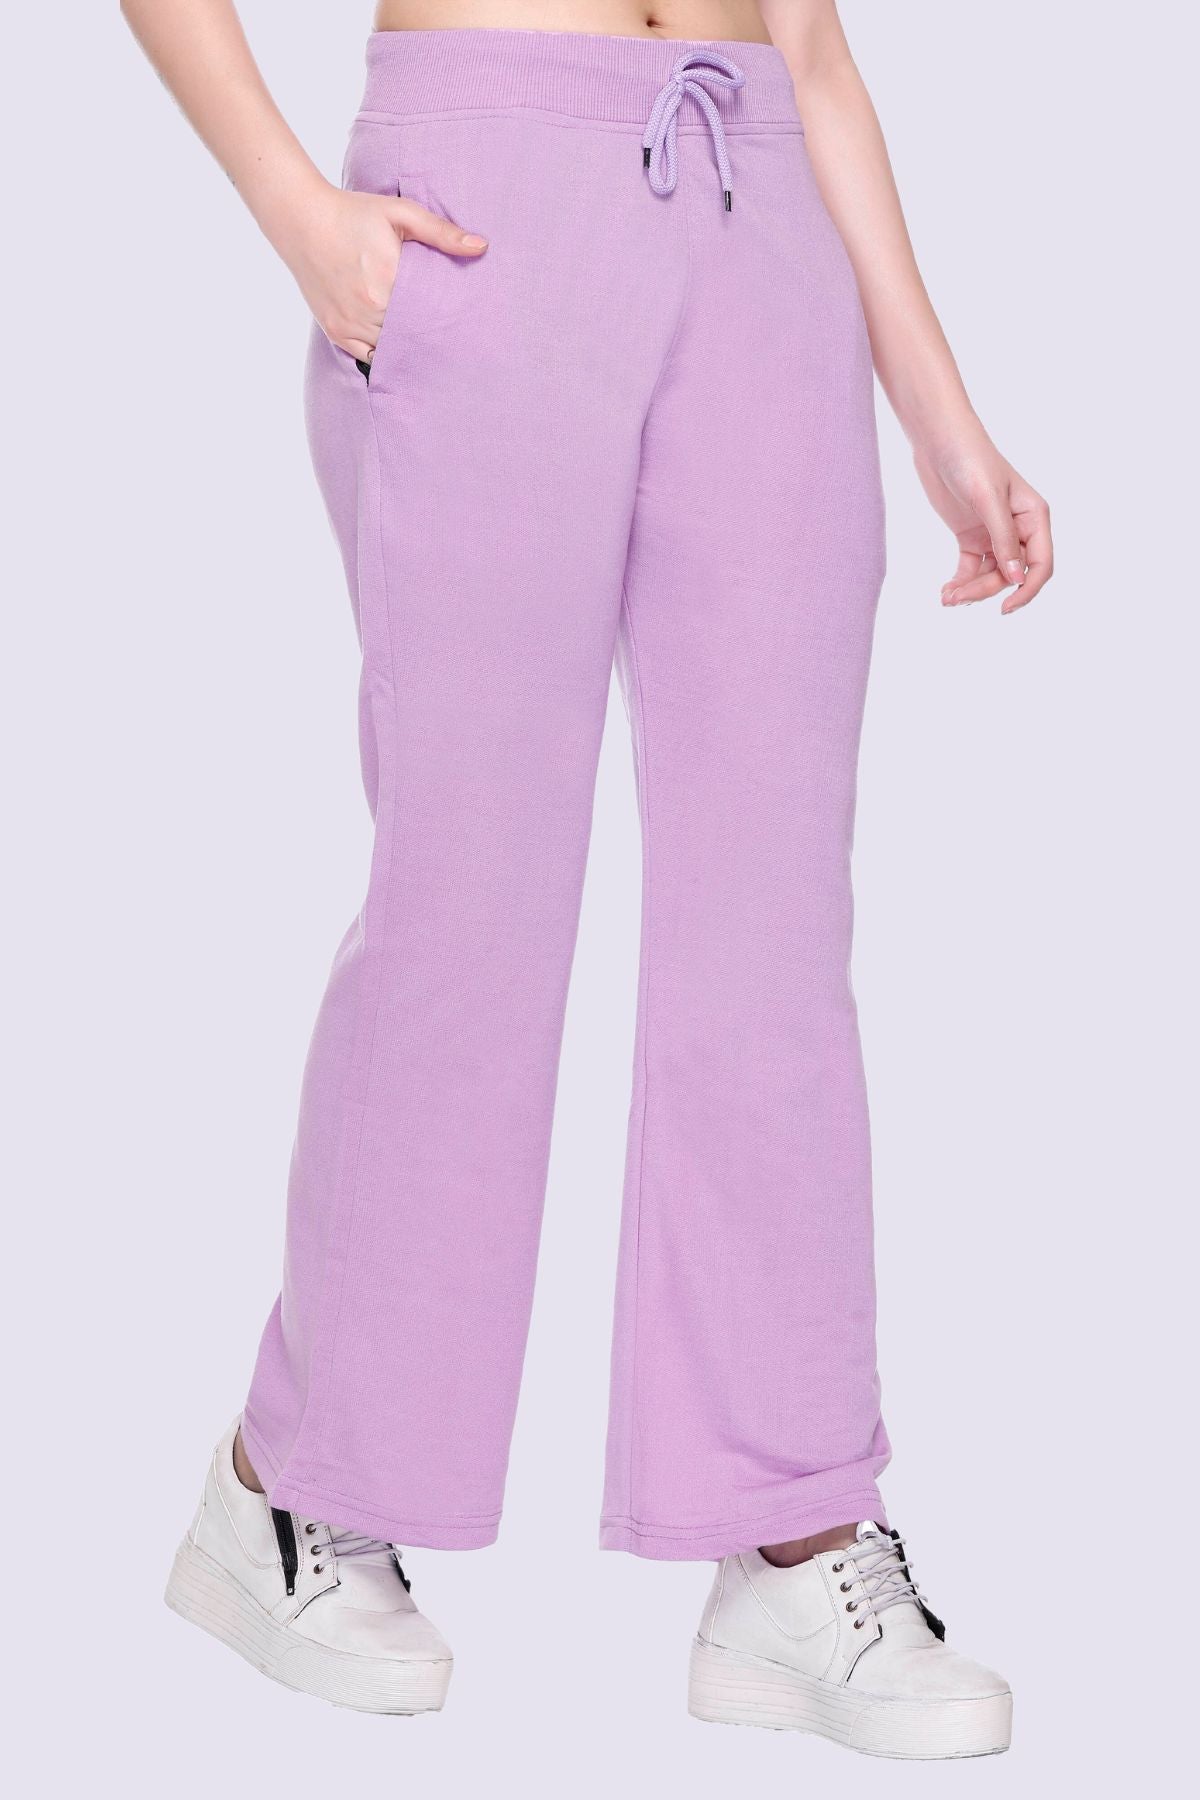 White Moon  Women Solid Lavender Bootcut Track Pants